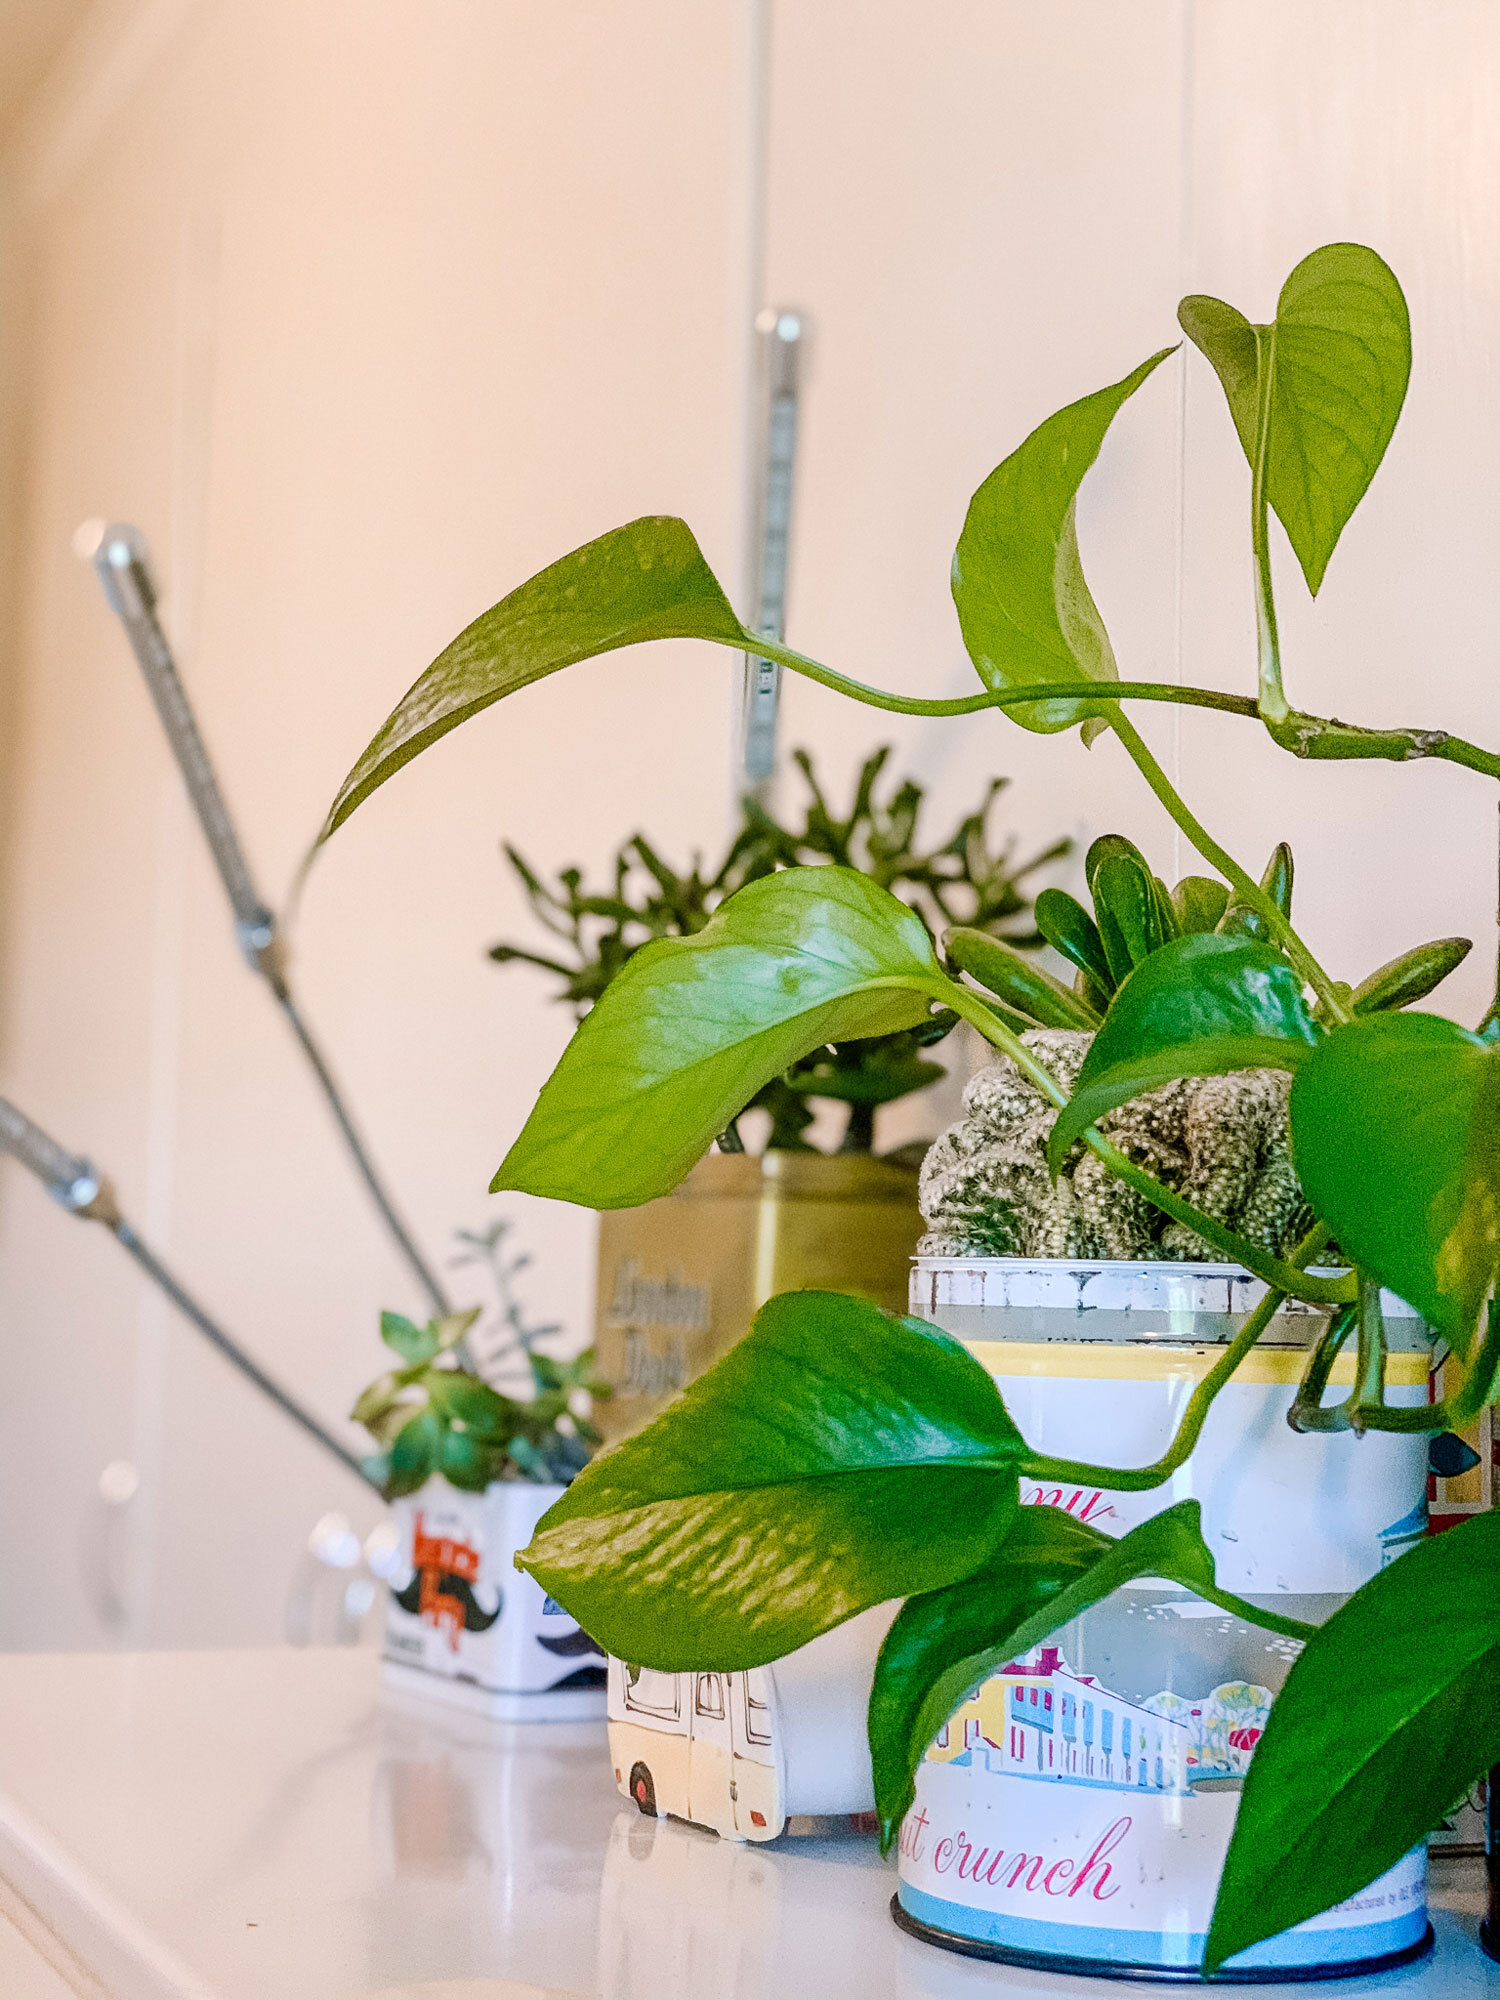 Beginner's Guide to Choosing and Using Grow Lights